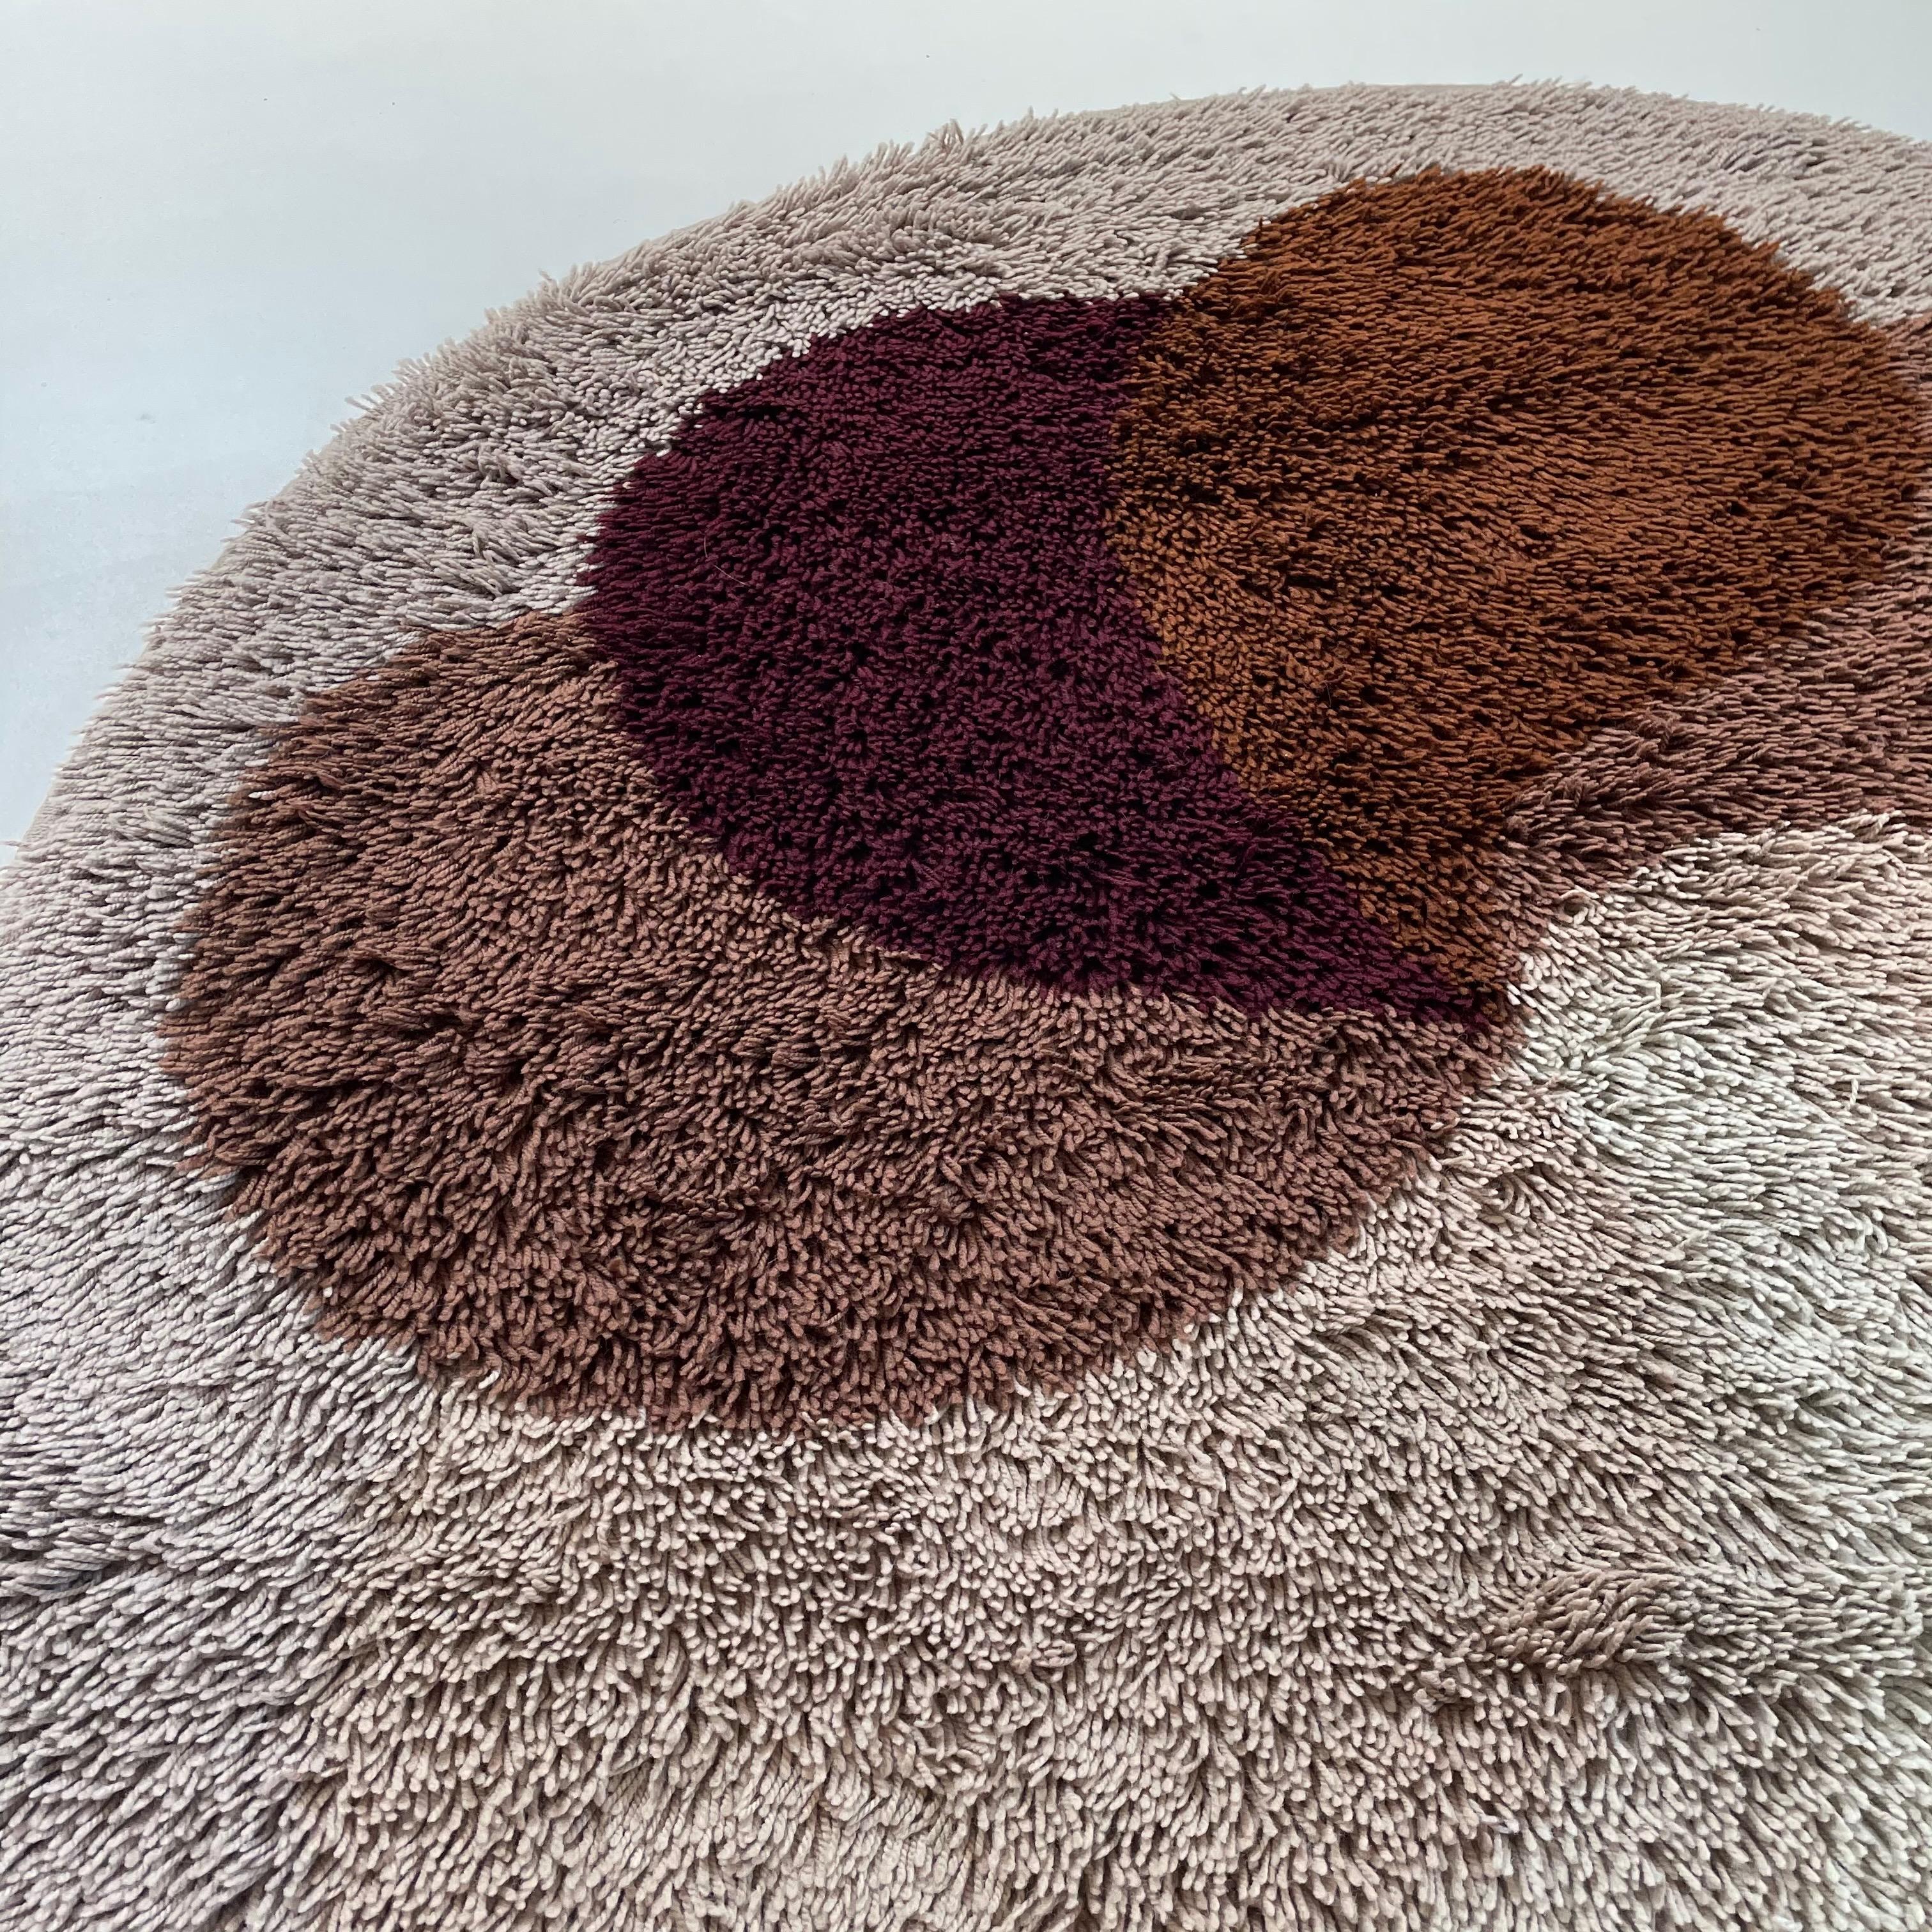 Psychedelic Multi-Color Panton Style High Pile Rya Rug Carpet Desso, Netherlands In Good Condition For Sale In Kirchlengern, DE